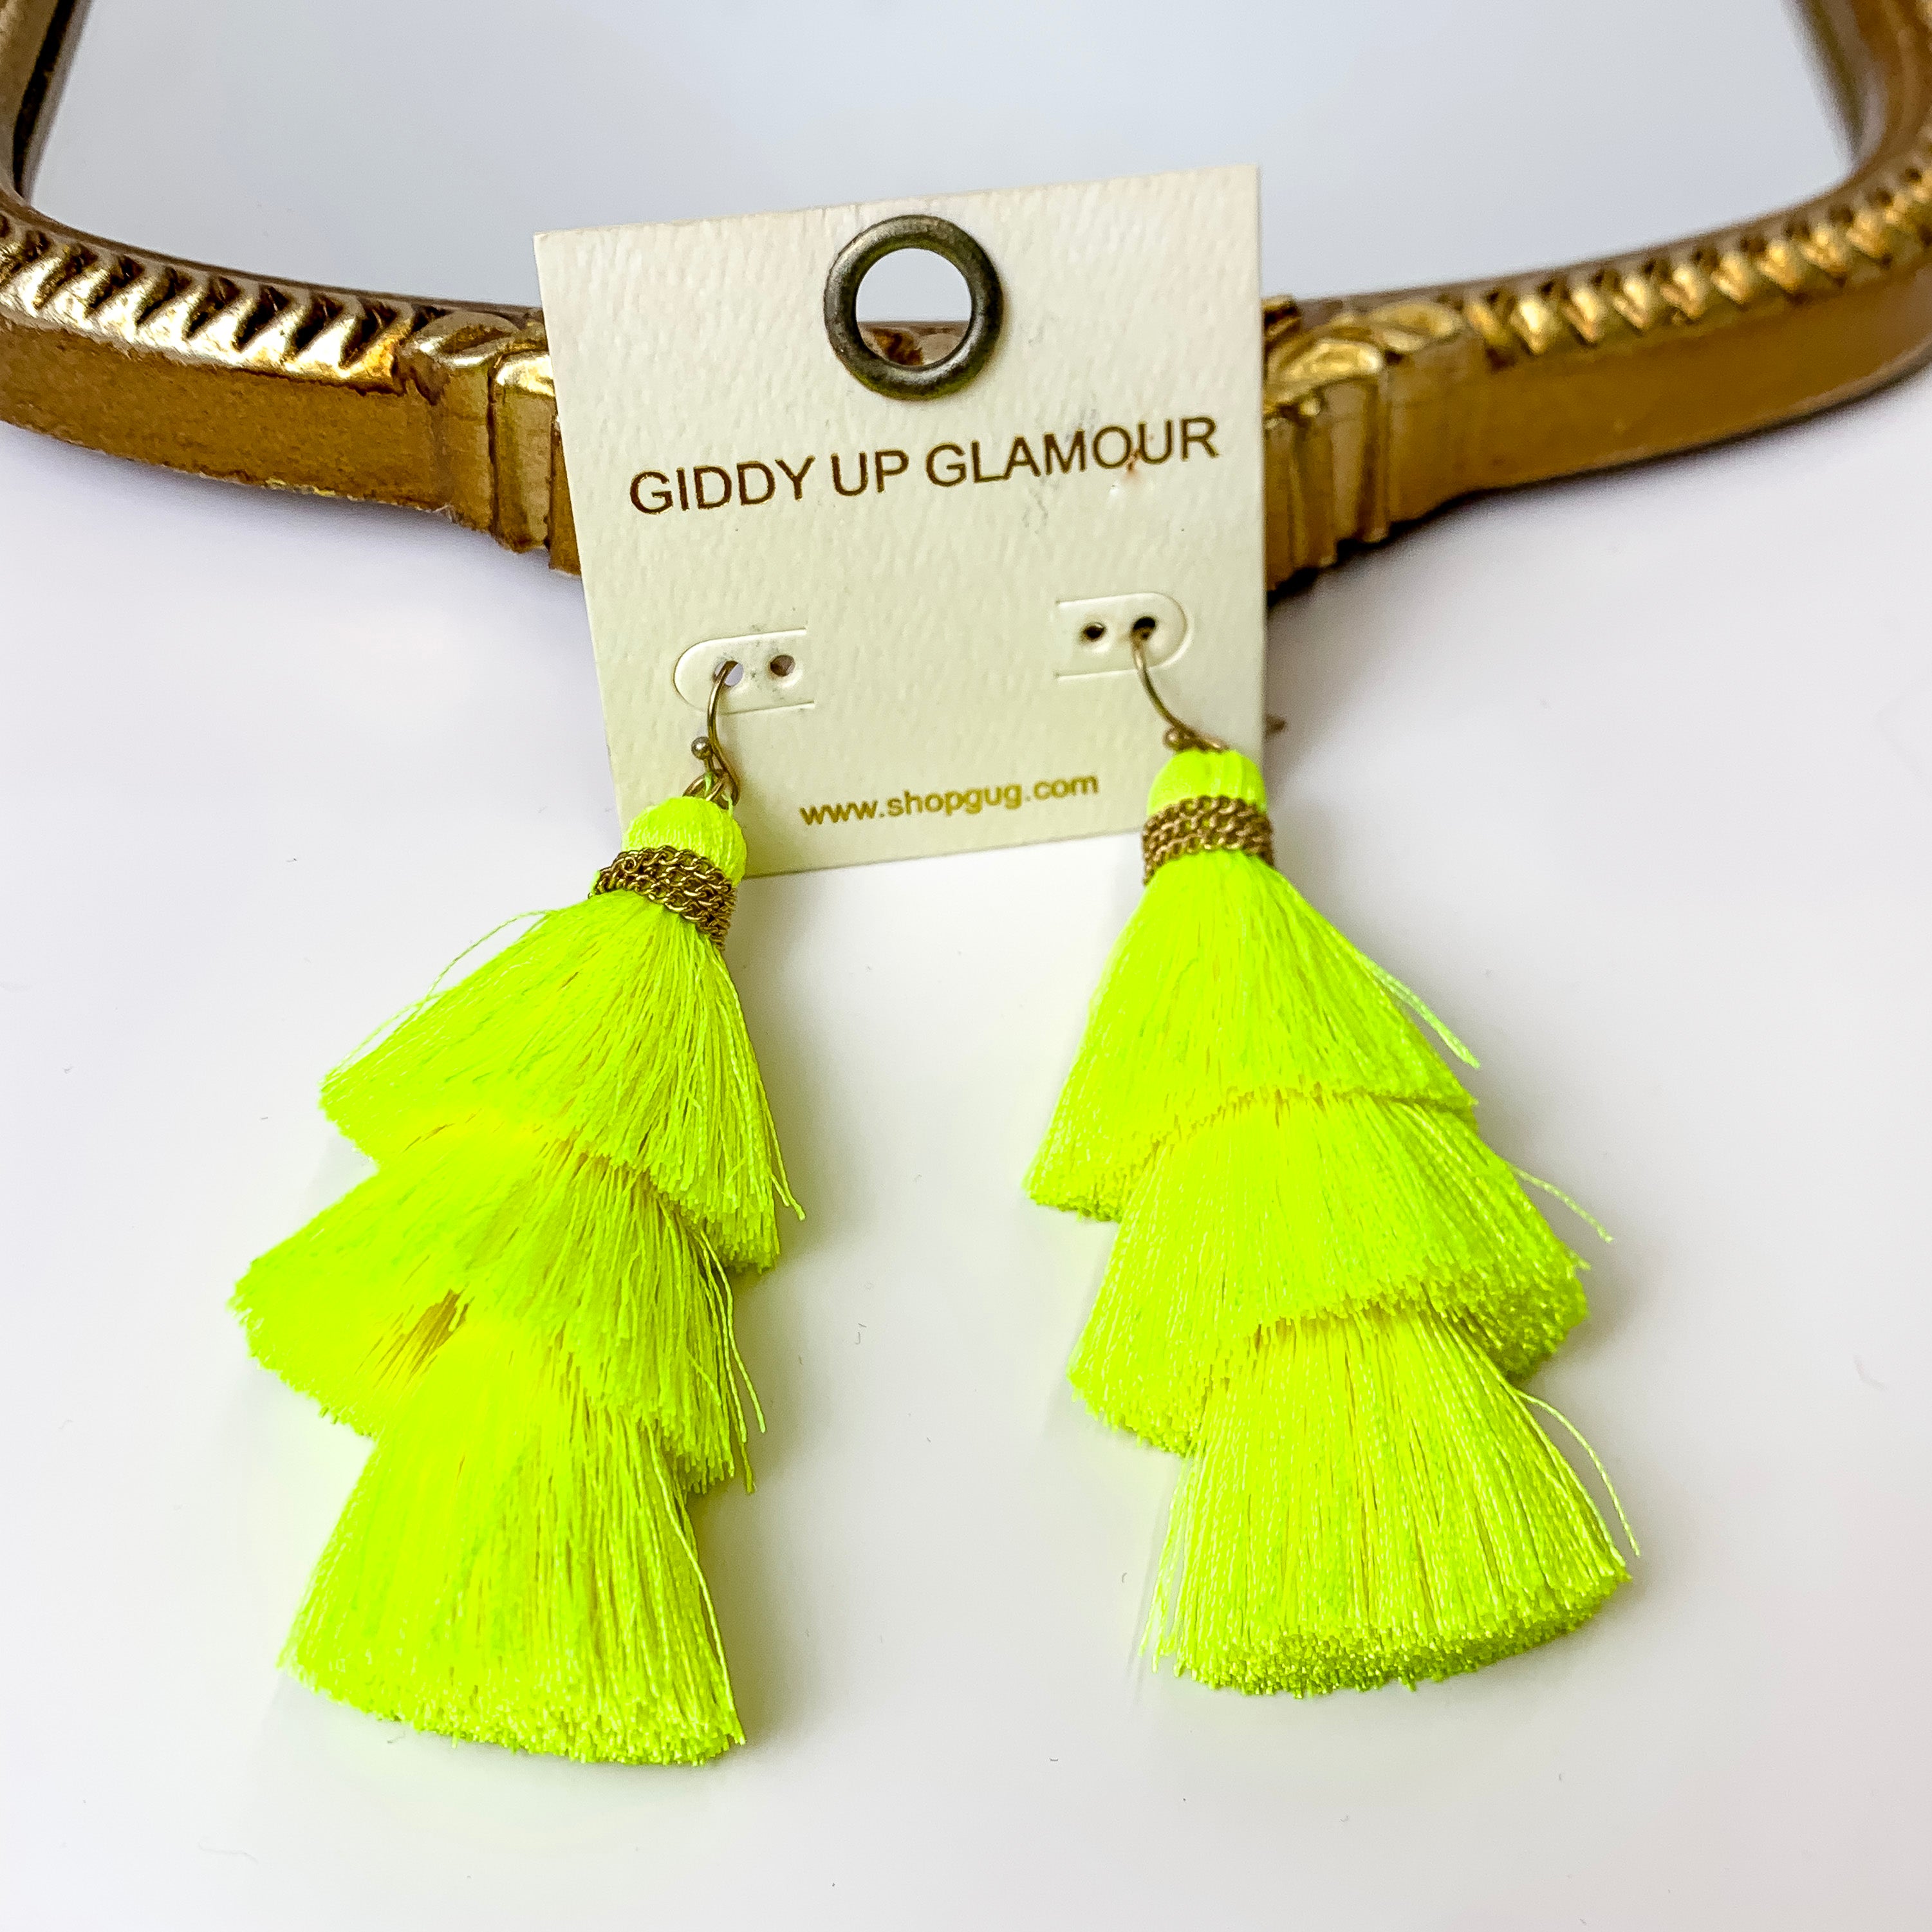 Three Tiered Tassel Earrings in Neon Yellow - Giddy Up Glamour Boutique